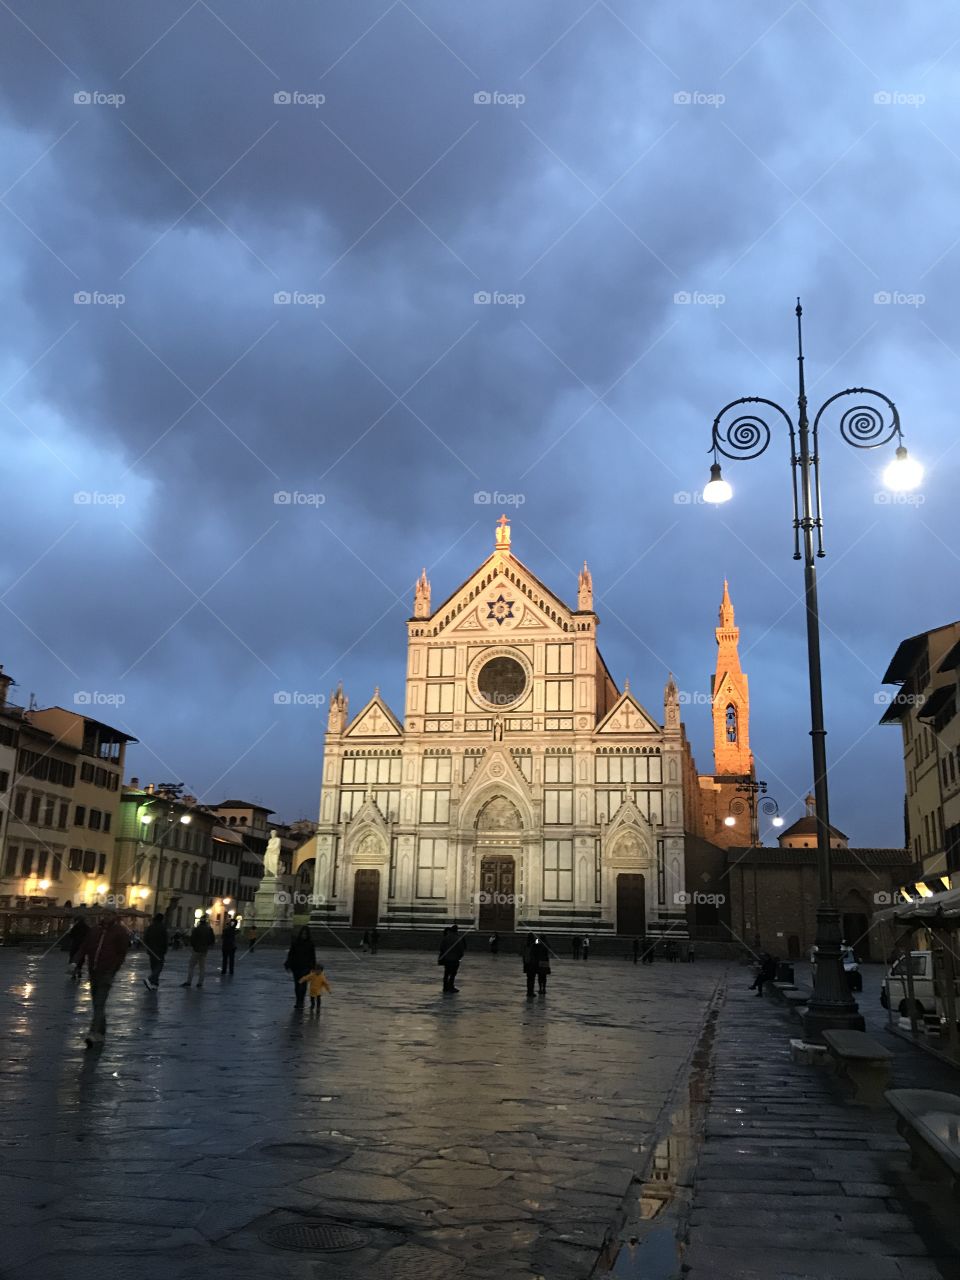 Piazza Santa Croce at dusk in Florence, Italy.